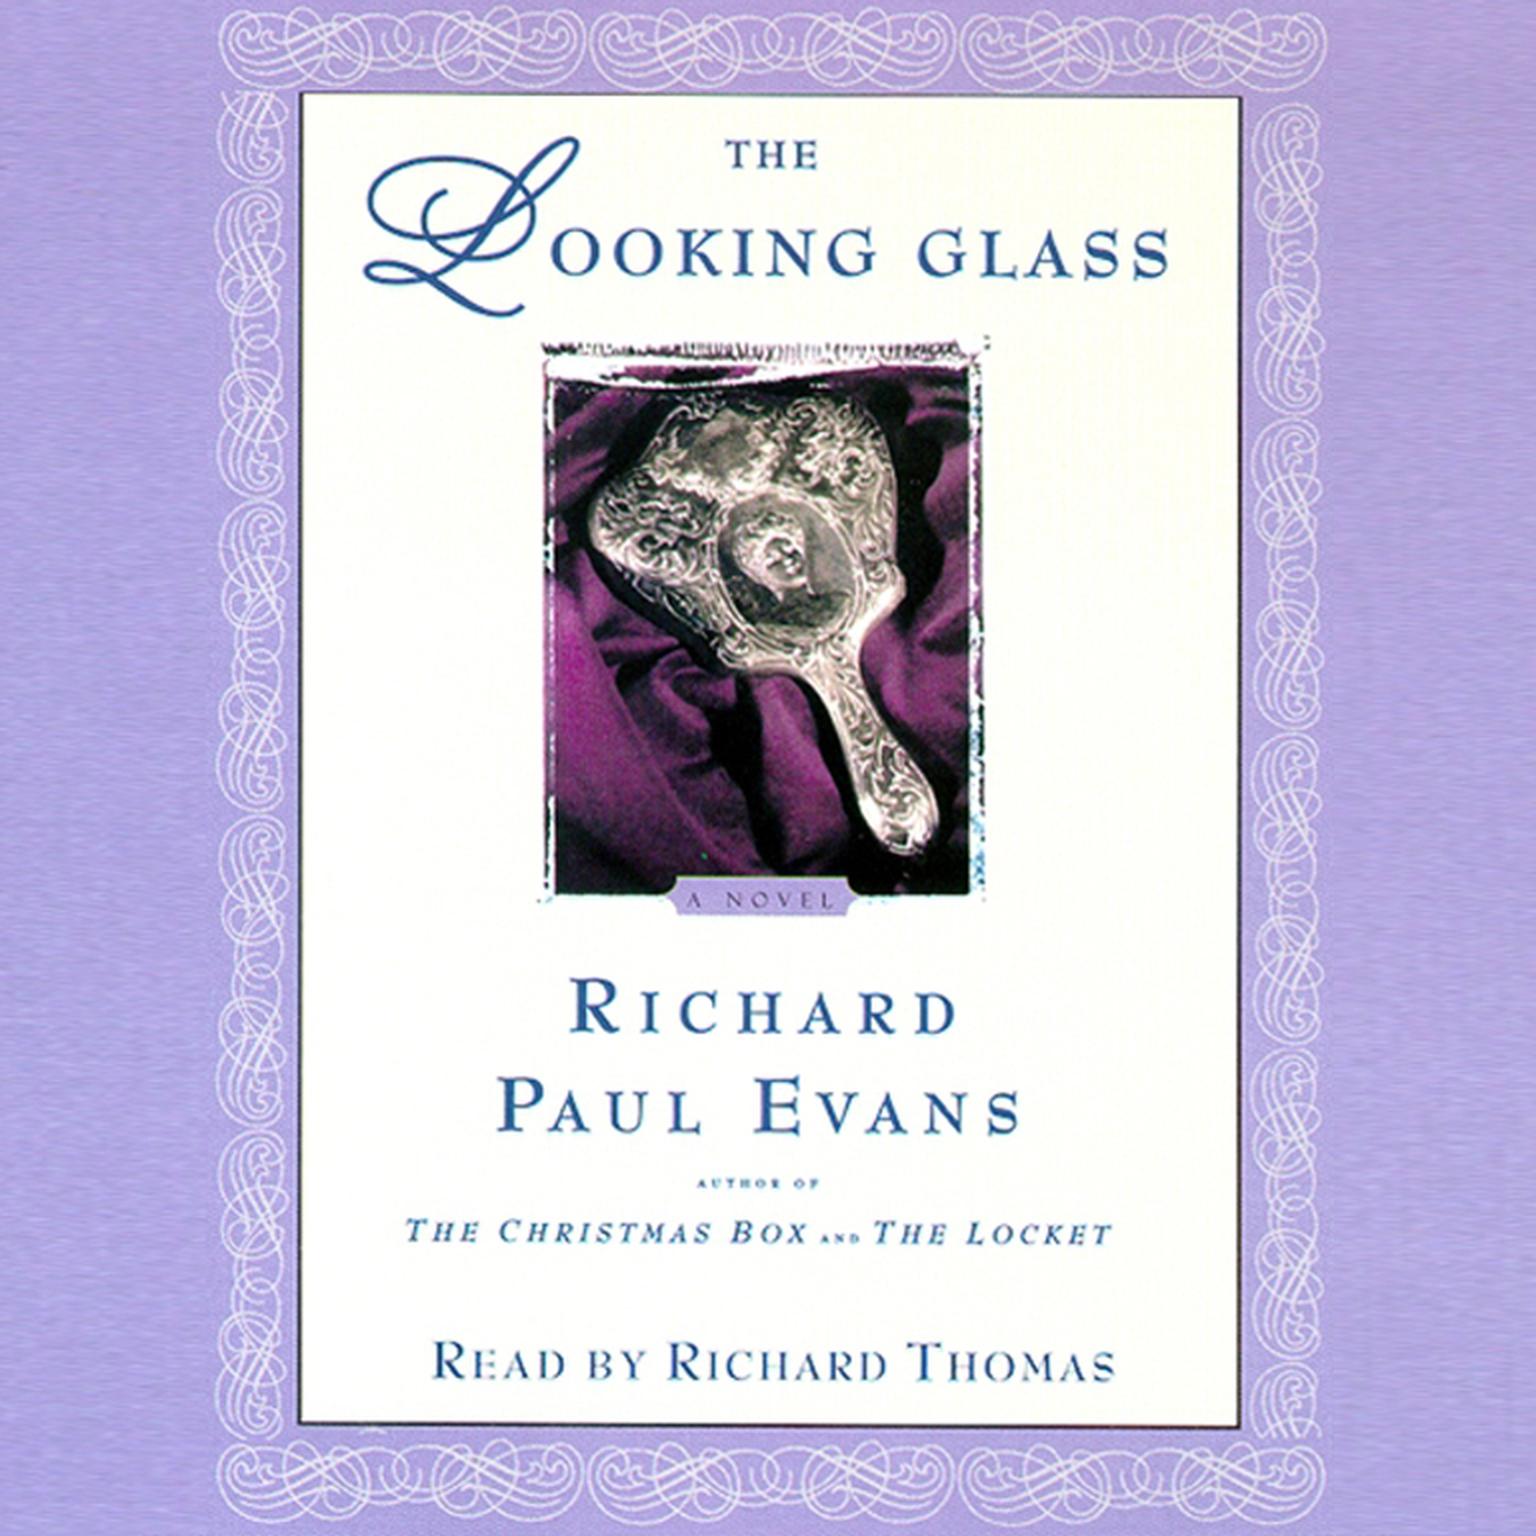 The Looking Glass (Abridged) Audiobook, by Richard Paul Evans